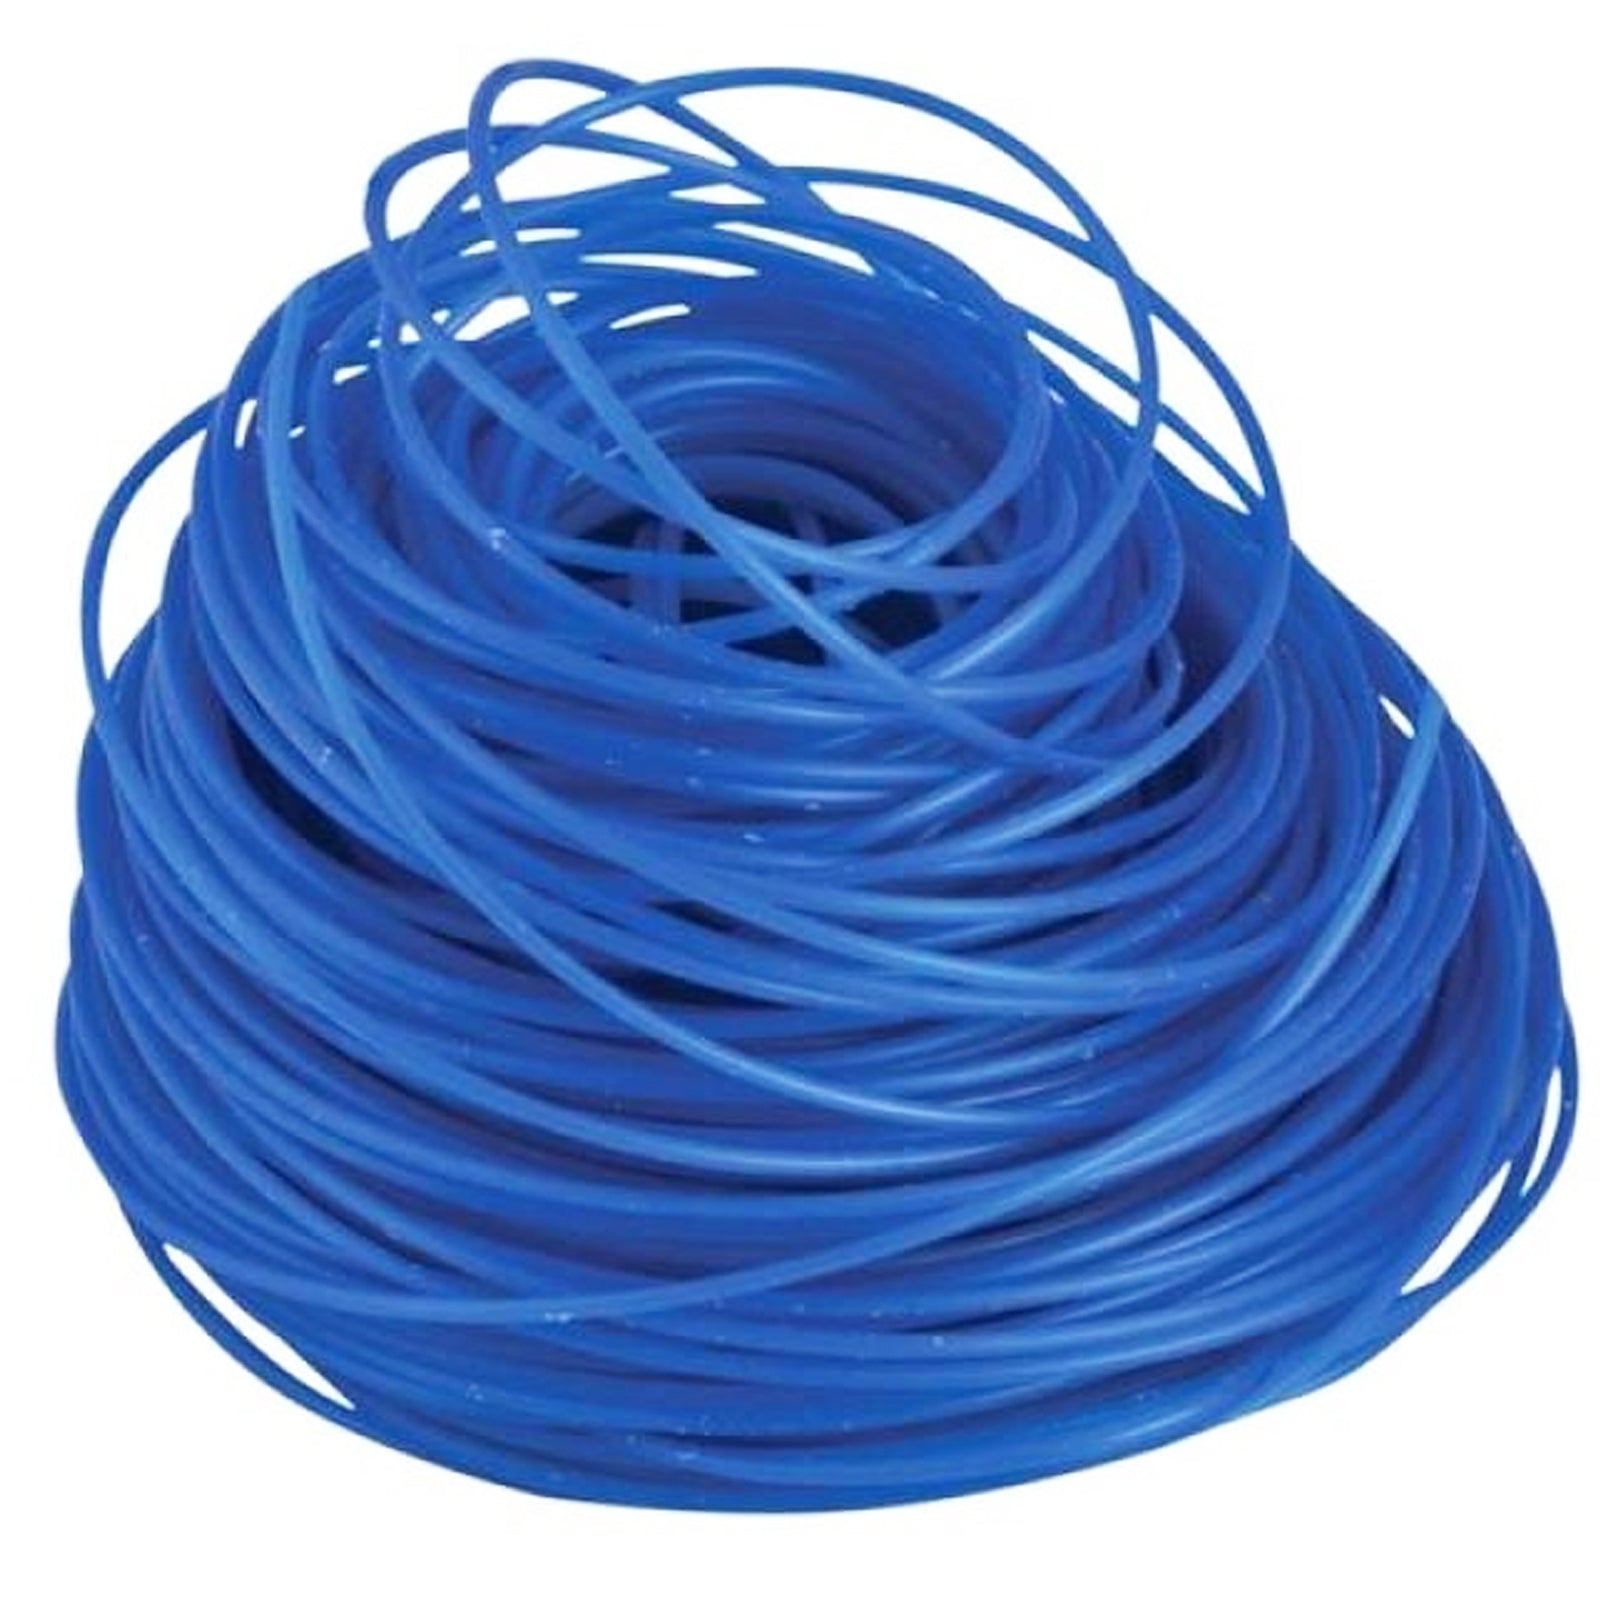 Trimmer Strimmer Line Spool Refill Cord 2 x 30m x 1.5mm Universal Blue Auto-Feed